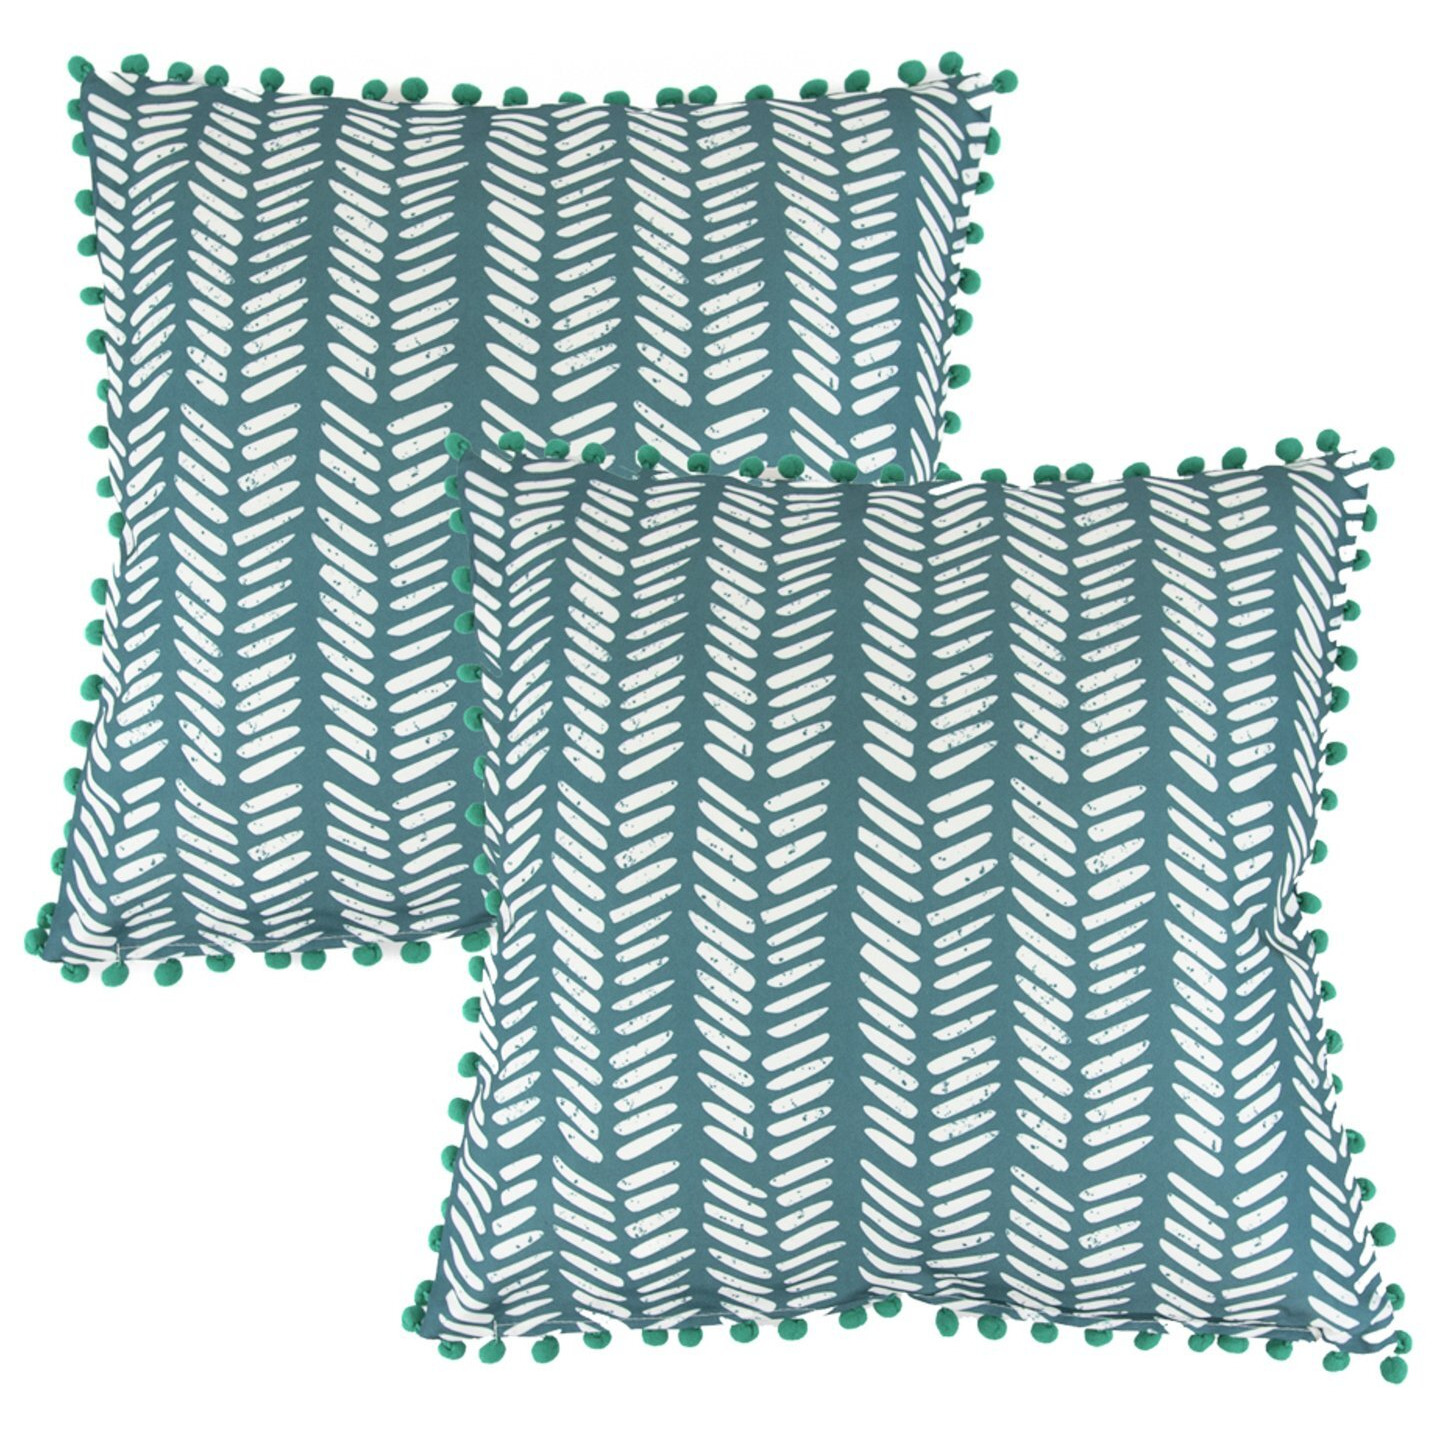 Streetwize Teal Fern Outdoor Cushions - Pack of 4 - image 1